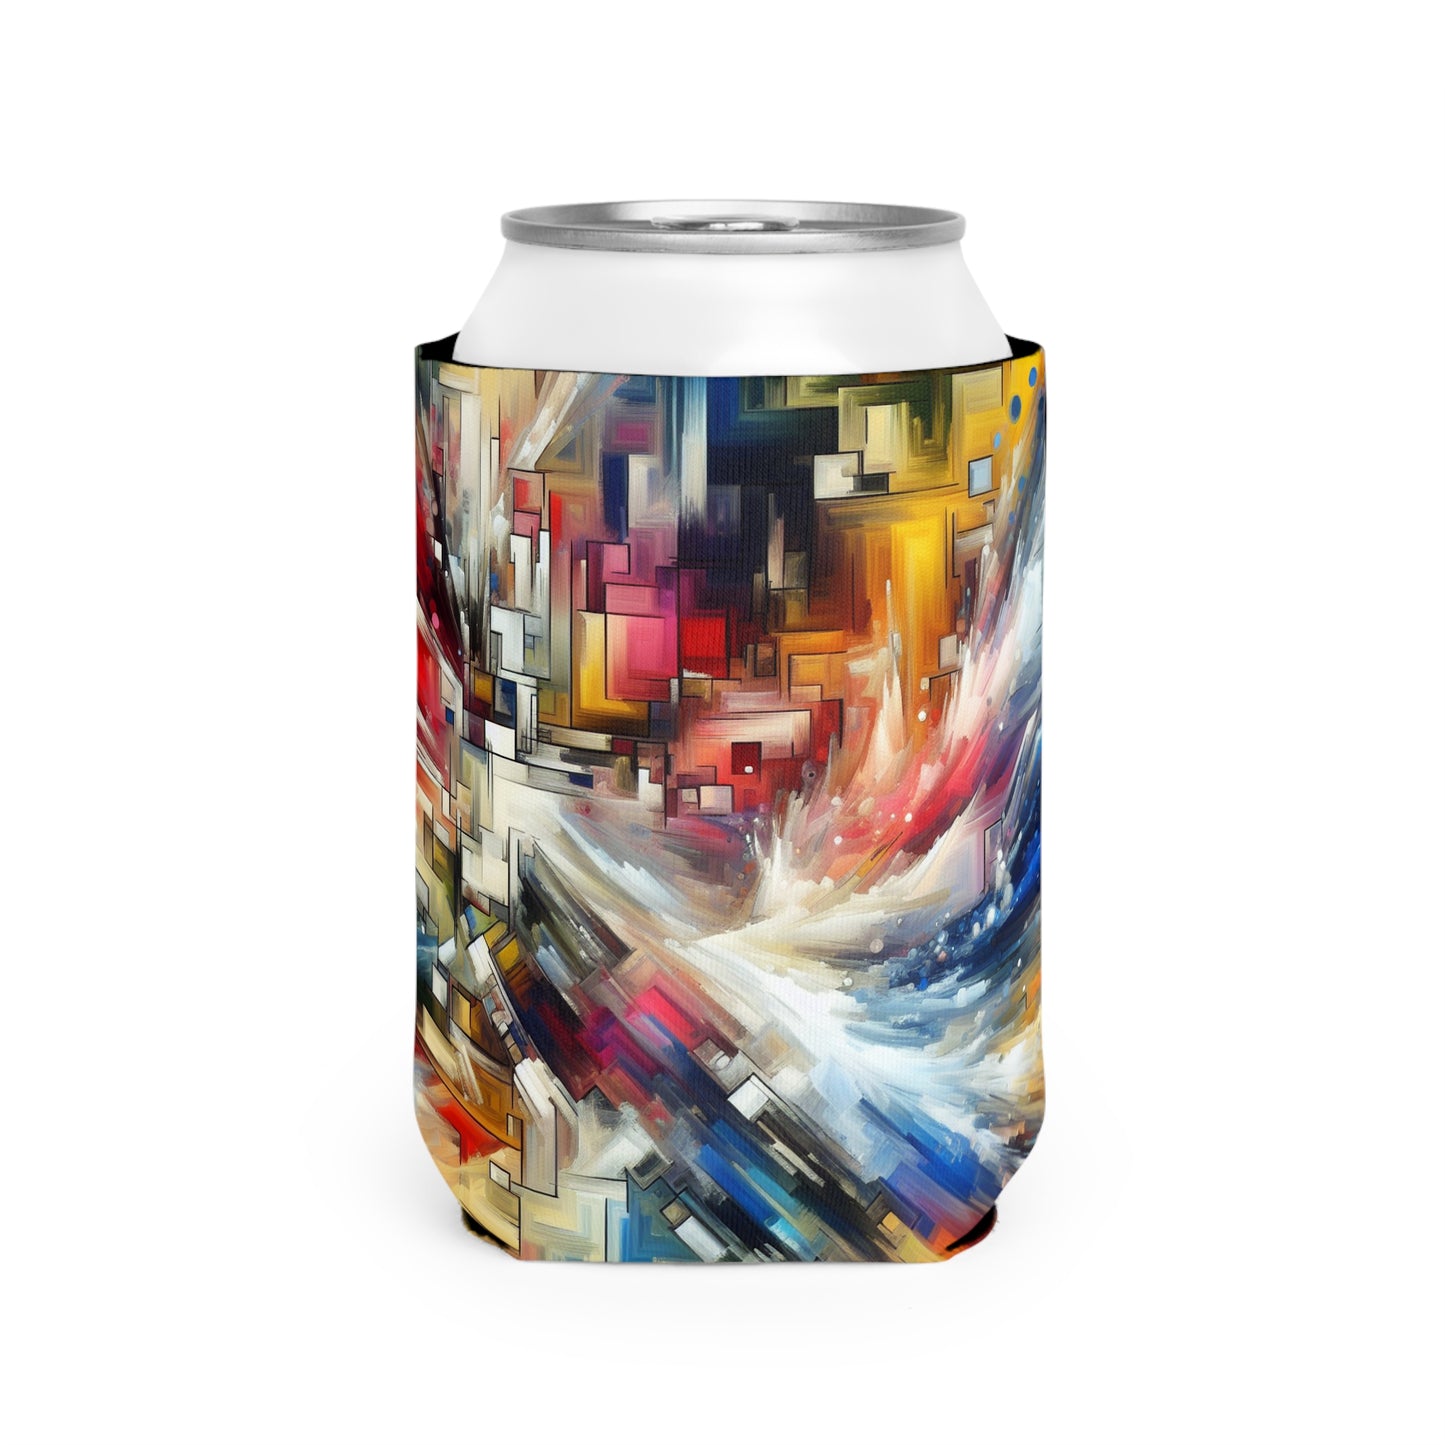 "Nature's Fury: An Abstract Expressionist Interpretation of a Raging Thunderstorm" - The Alien Can Cooler Sleeve Abstract Expressionism